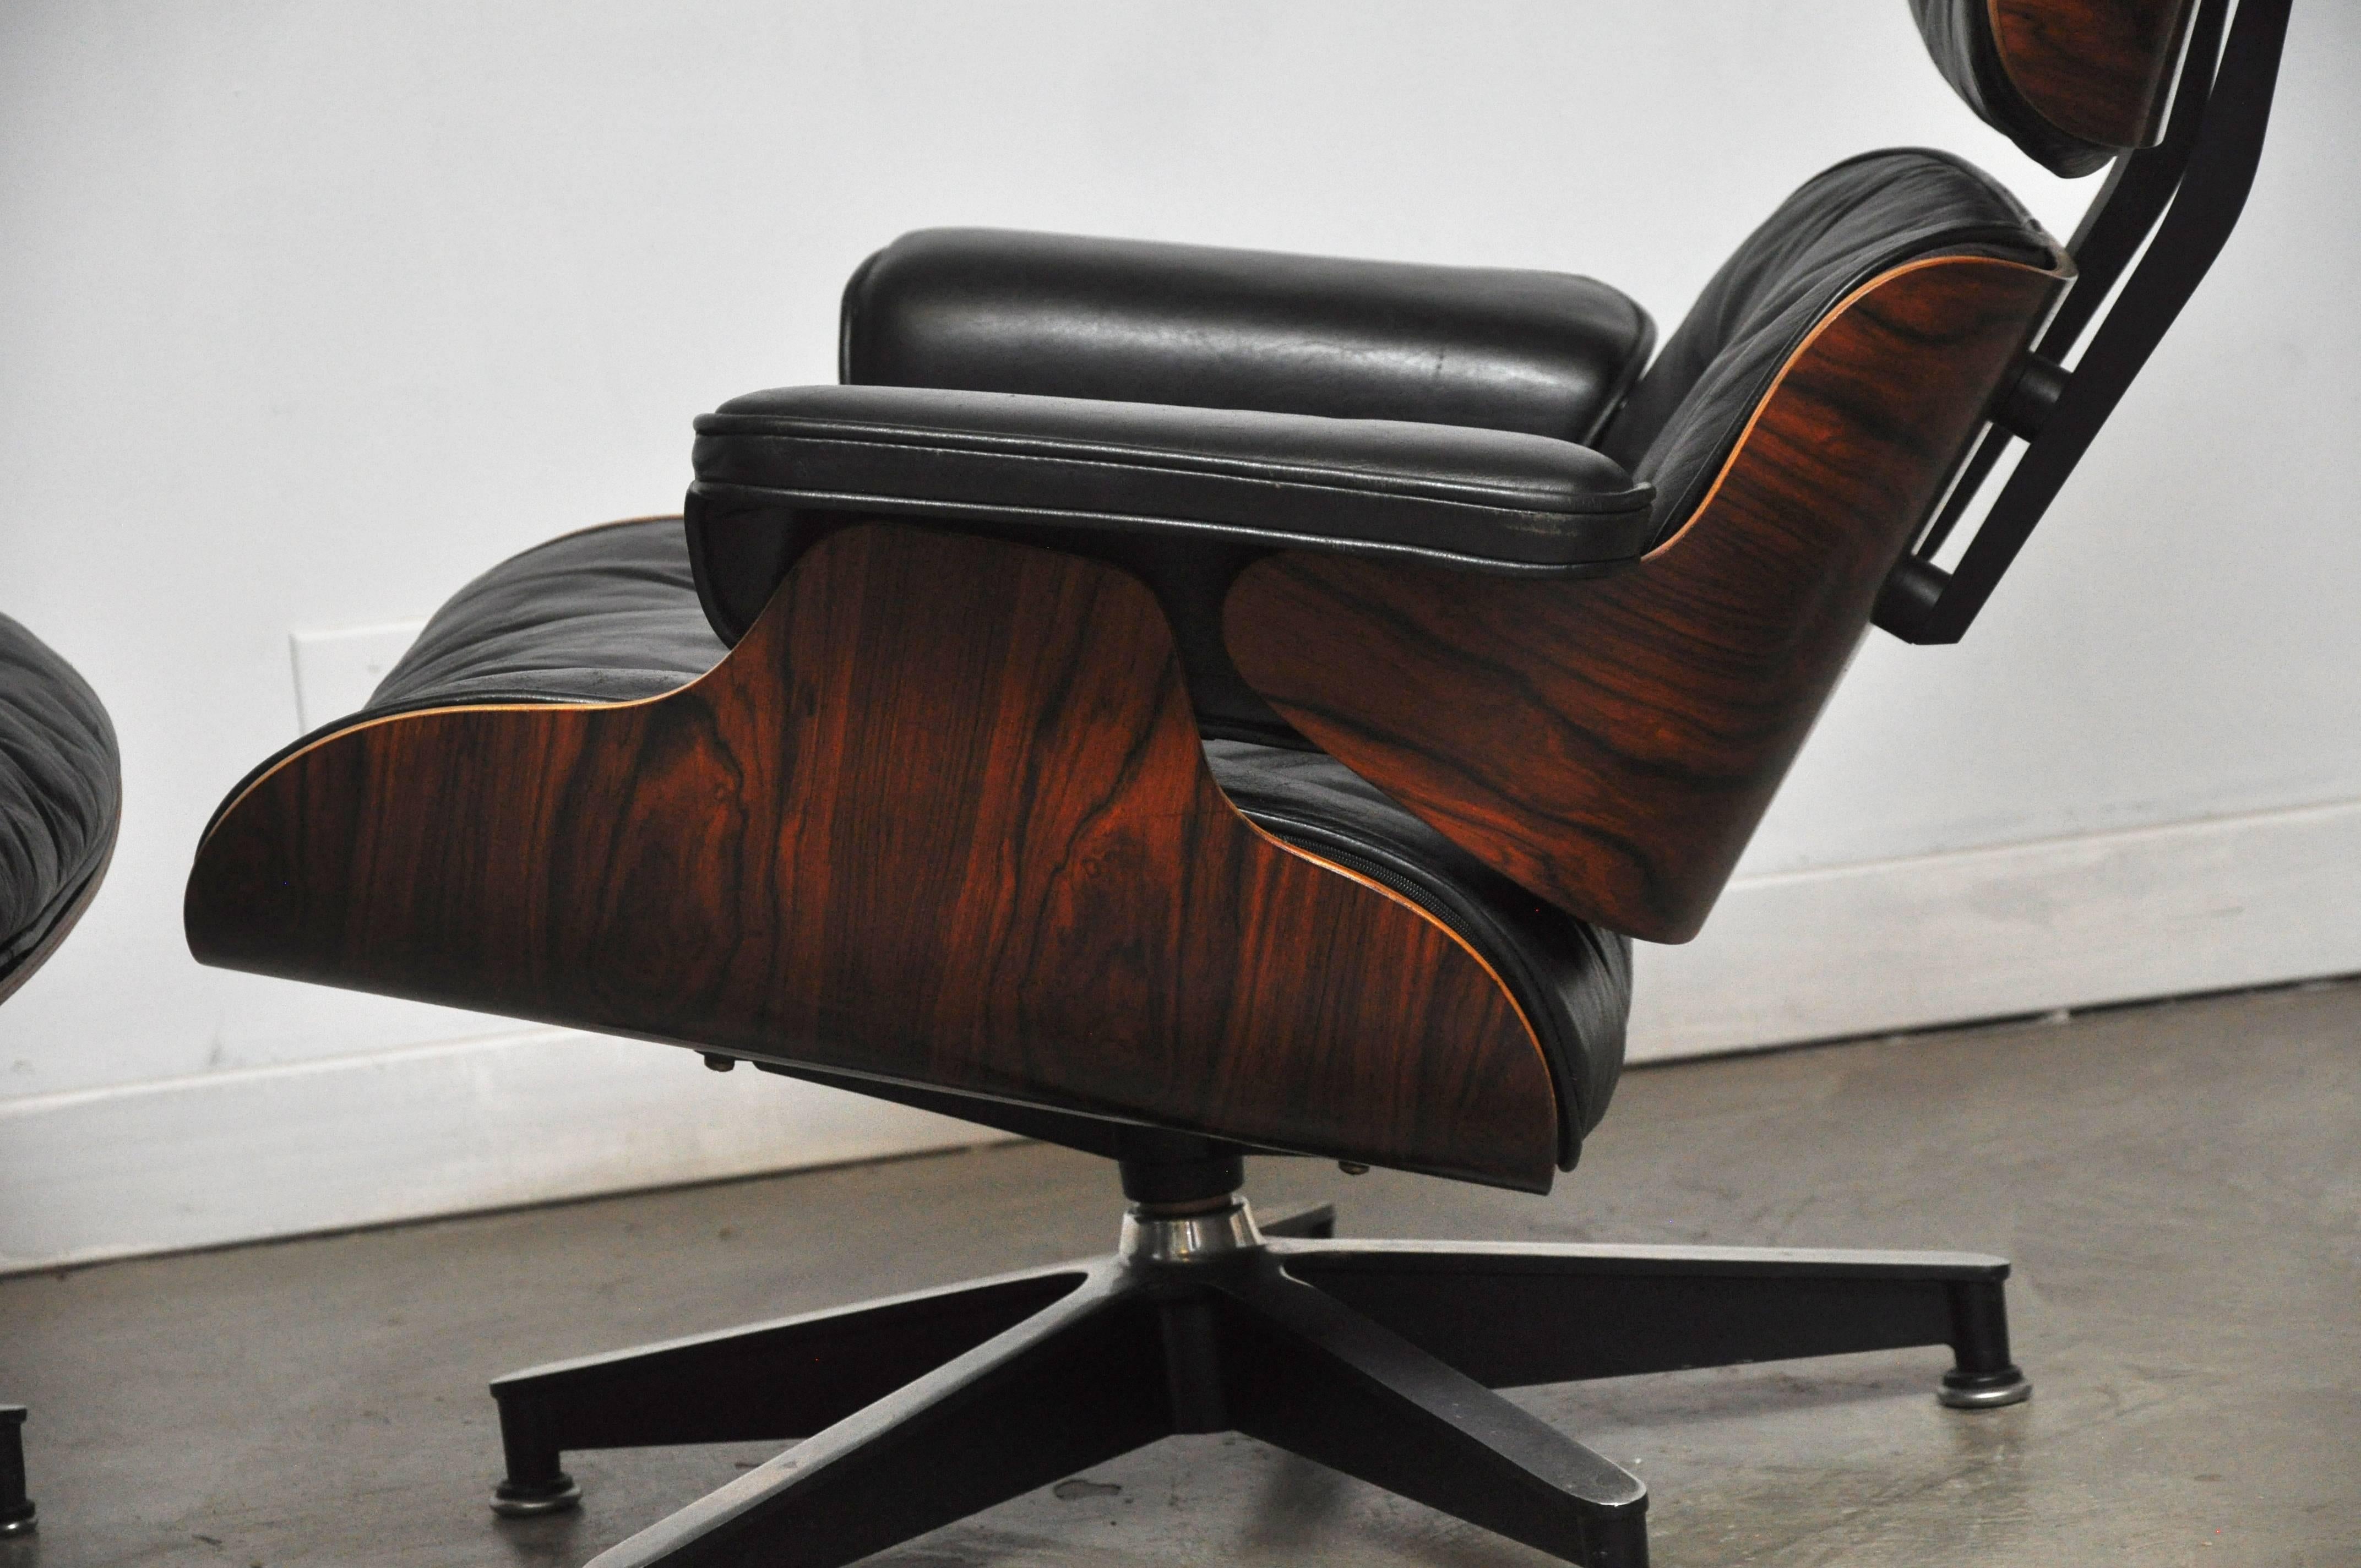 Early model 670 rosewood lounge chair and 671 ottoman designed by Charles and Ray Eames for Herman Miller. Original black leather and refinished rosewood shells, circa early 1960s. Down cushions, rubber headrest shock mounts.